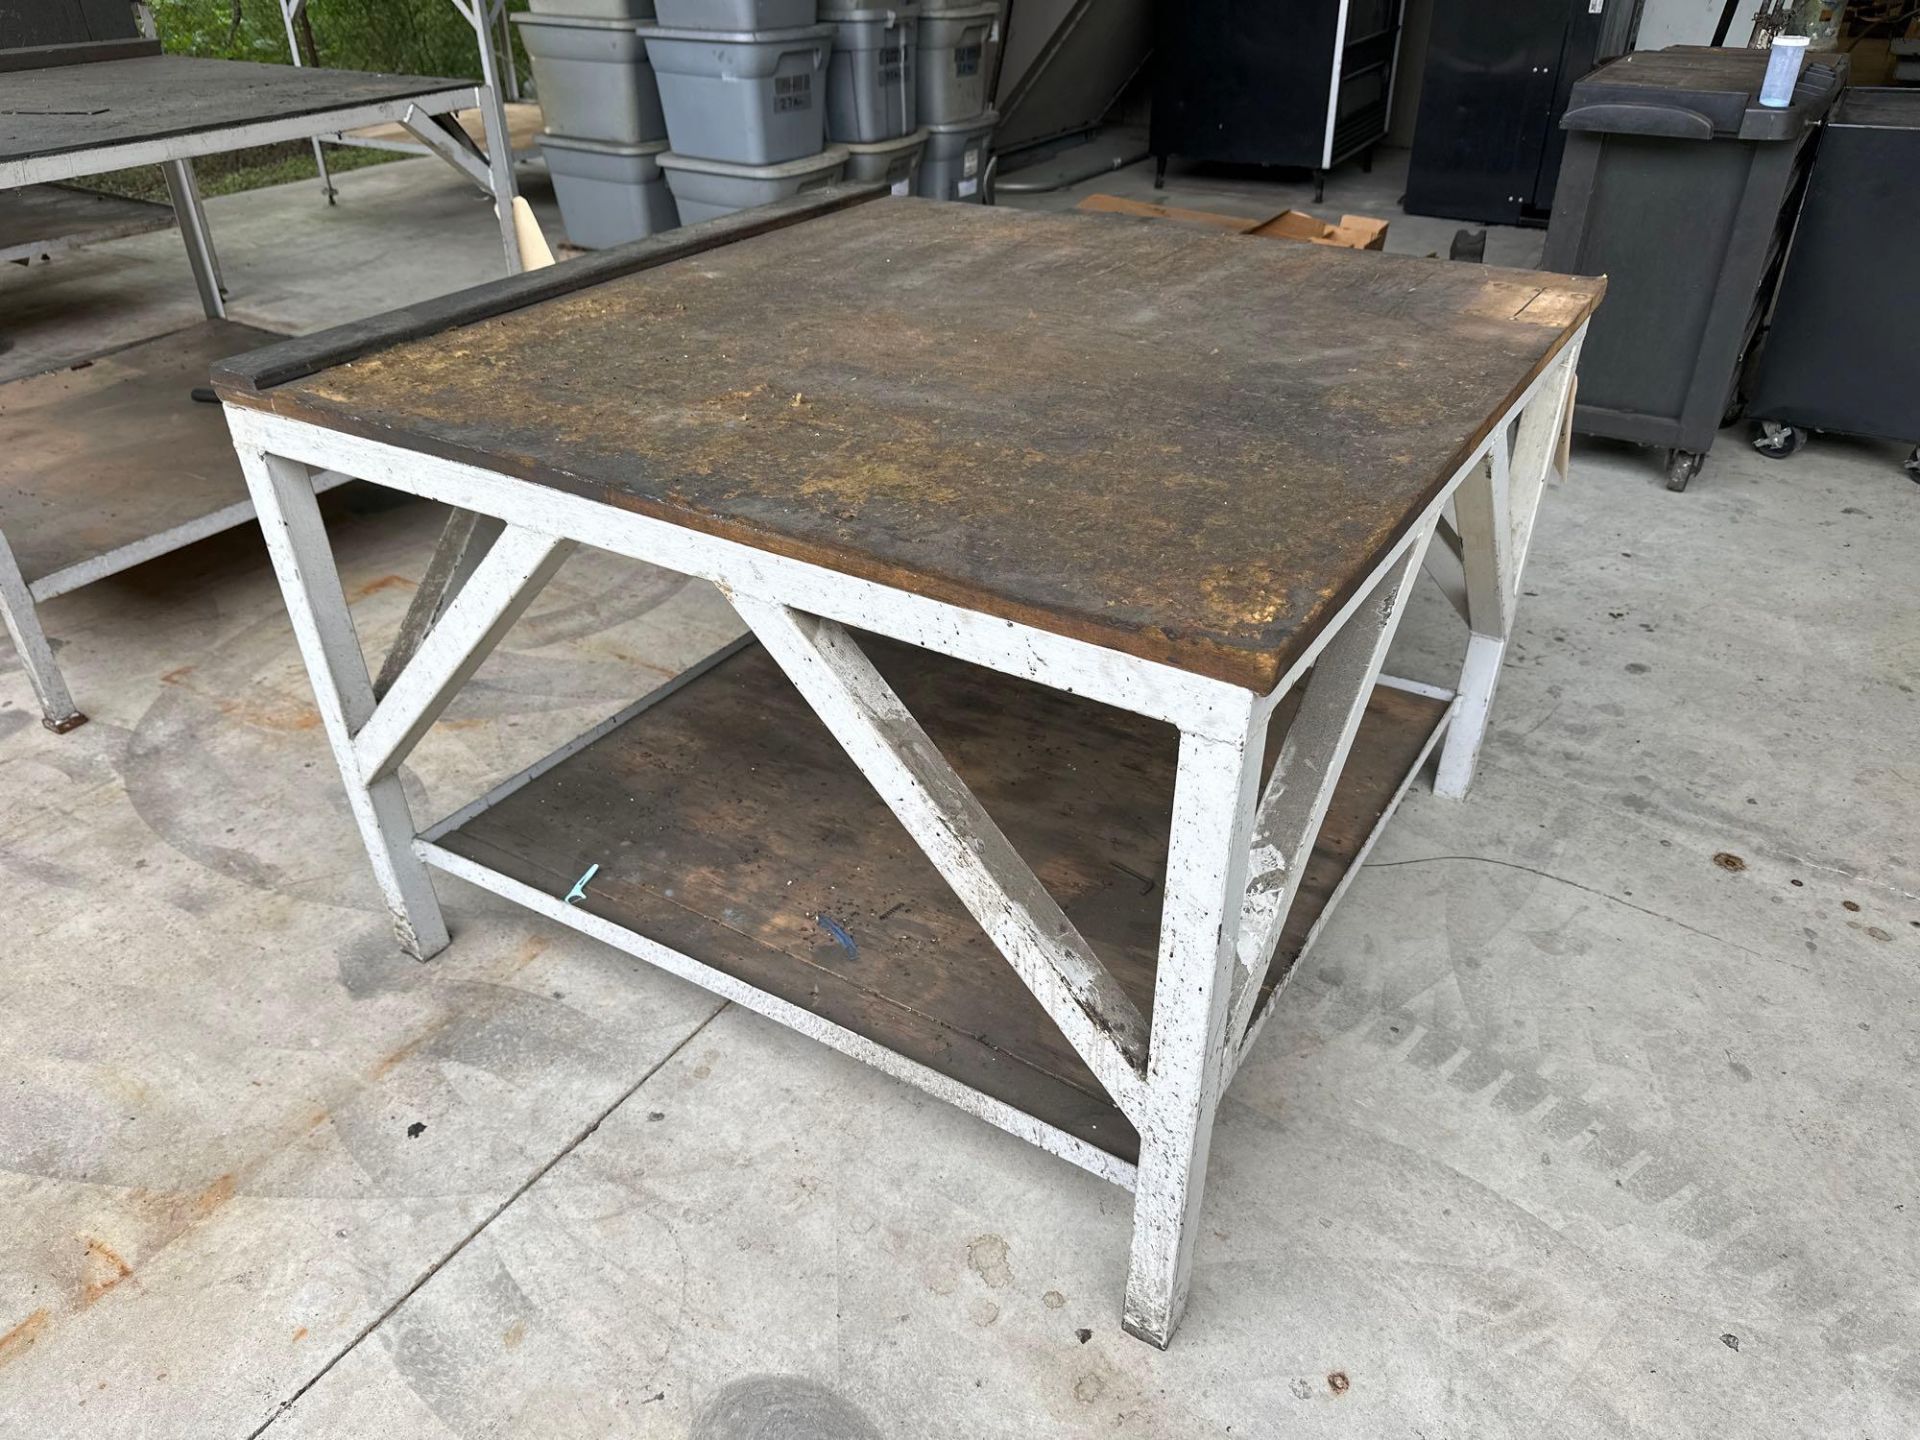 Metal Table with Wooden Top 48” X 48” X 39” - Image 3 of 3